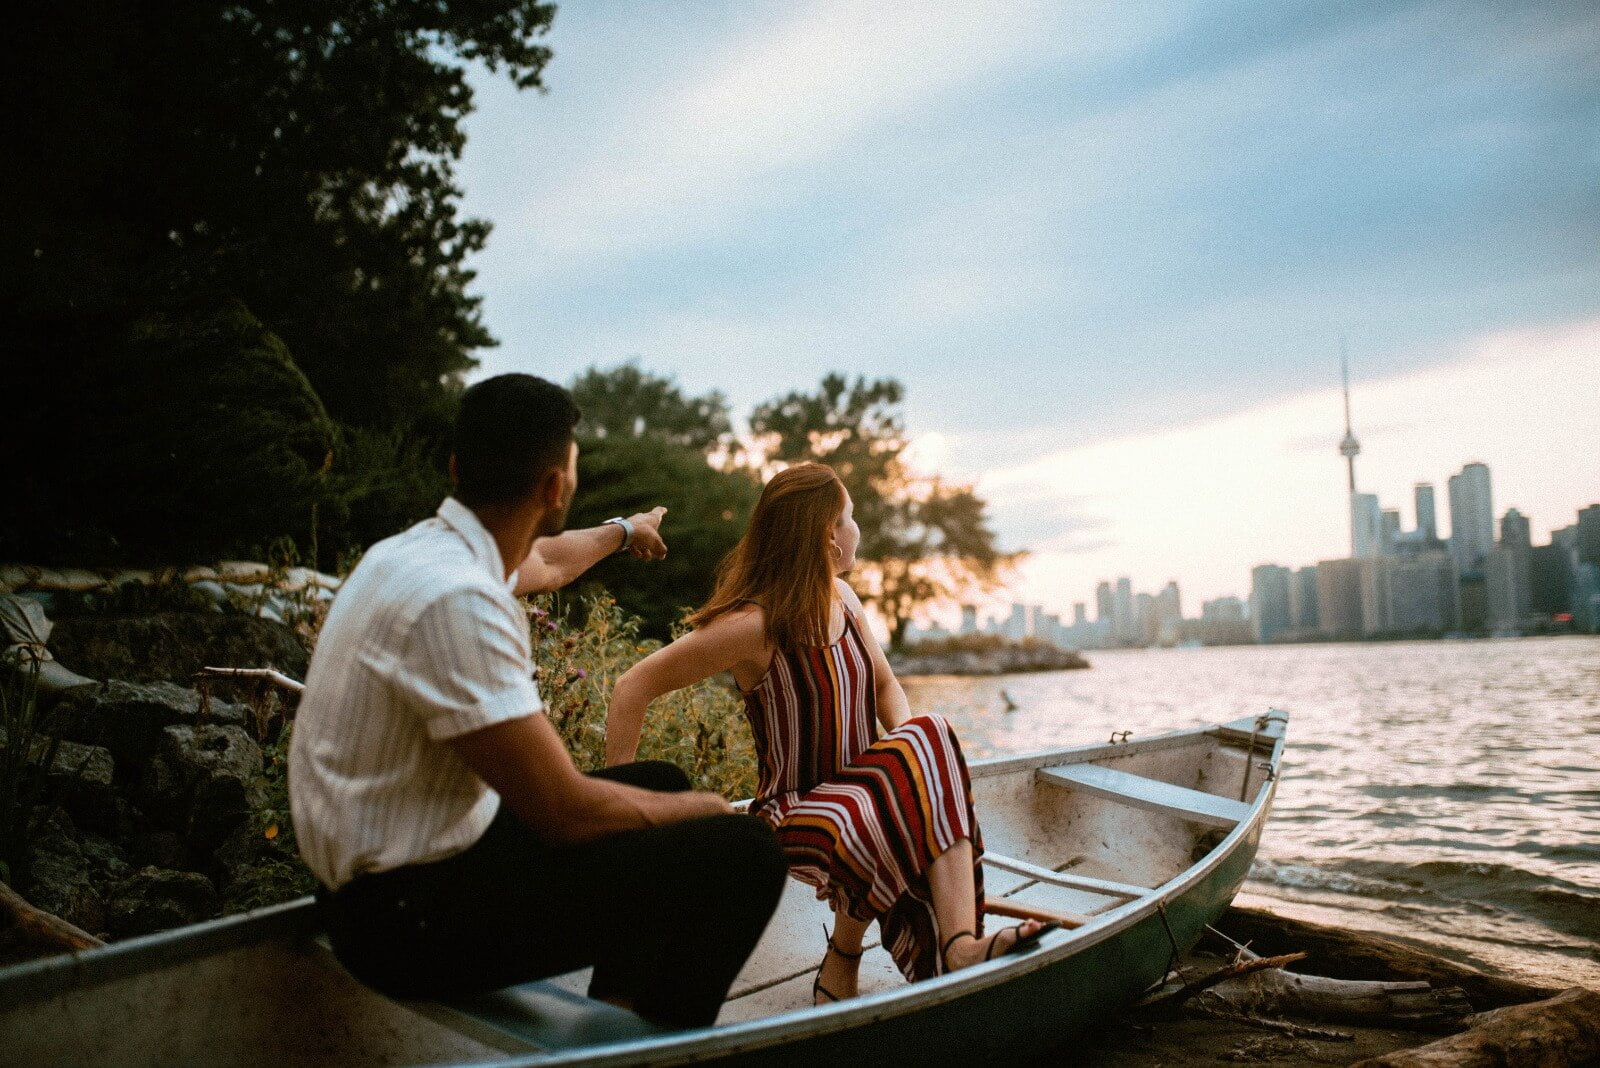 Man and Woman sitting on a small boat at one of the beaches at Toronto Centre Island. The man is pointing to the horizon, where the Toronto city skyline appears in the horizon. Image is taken close to sunset.